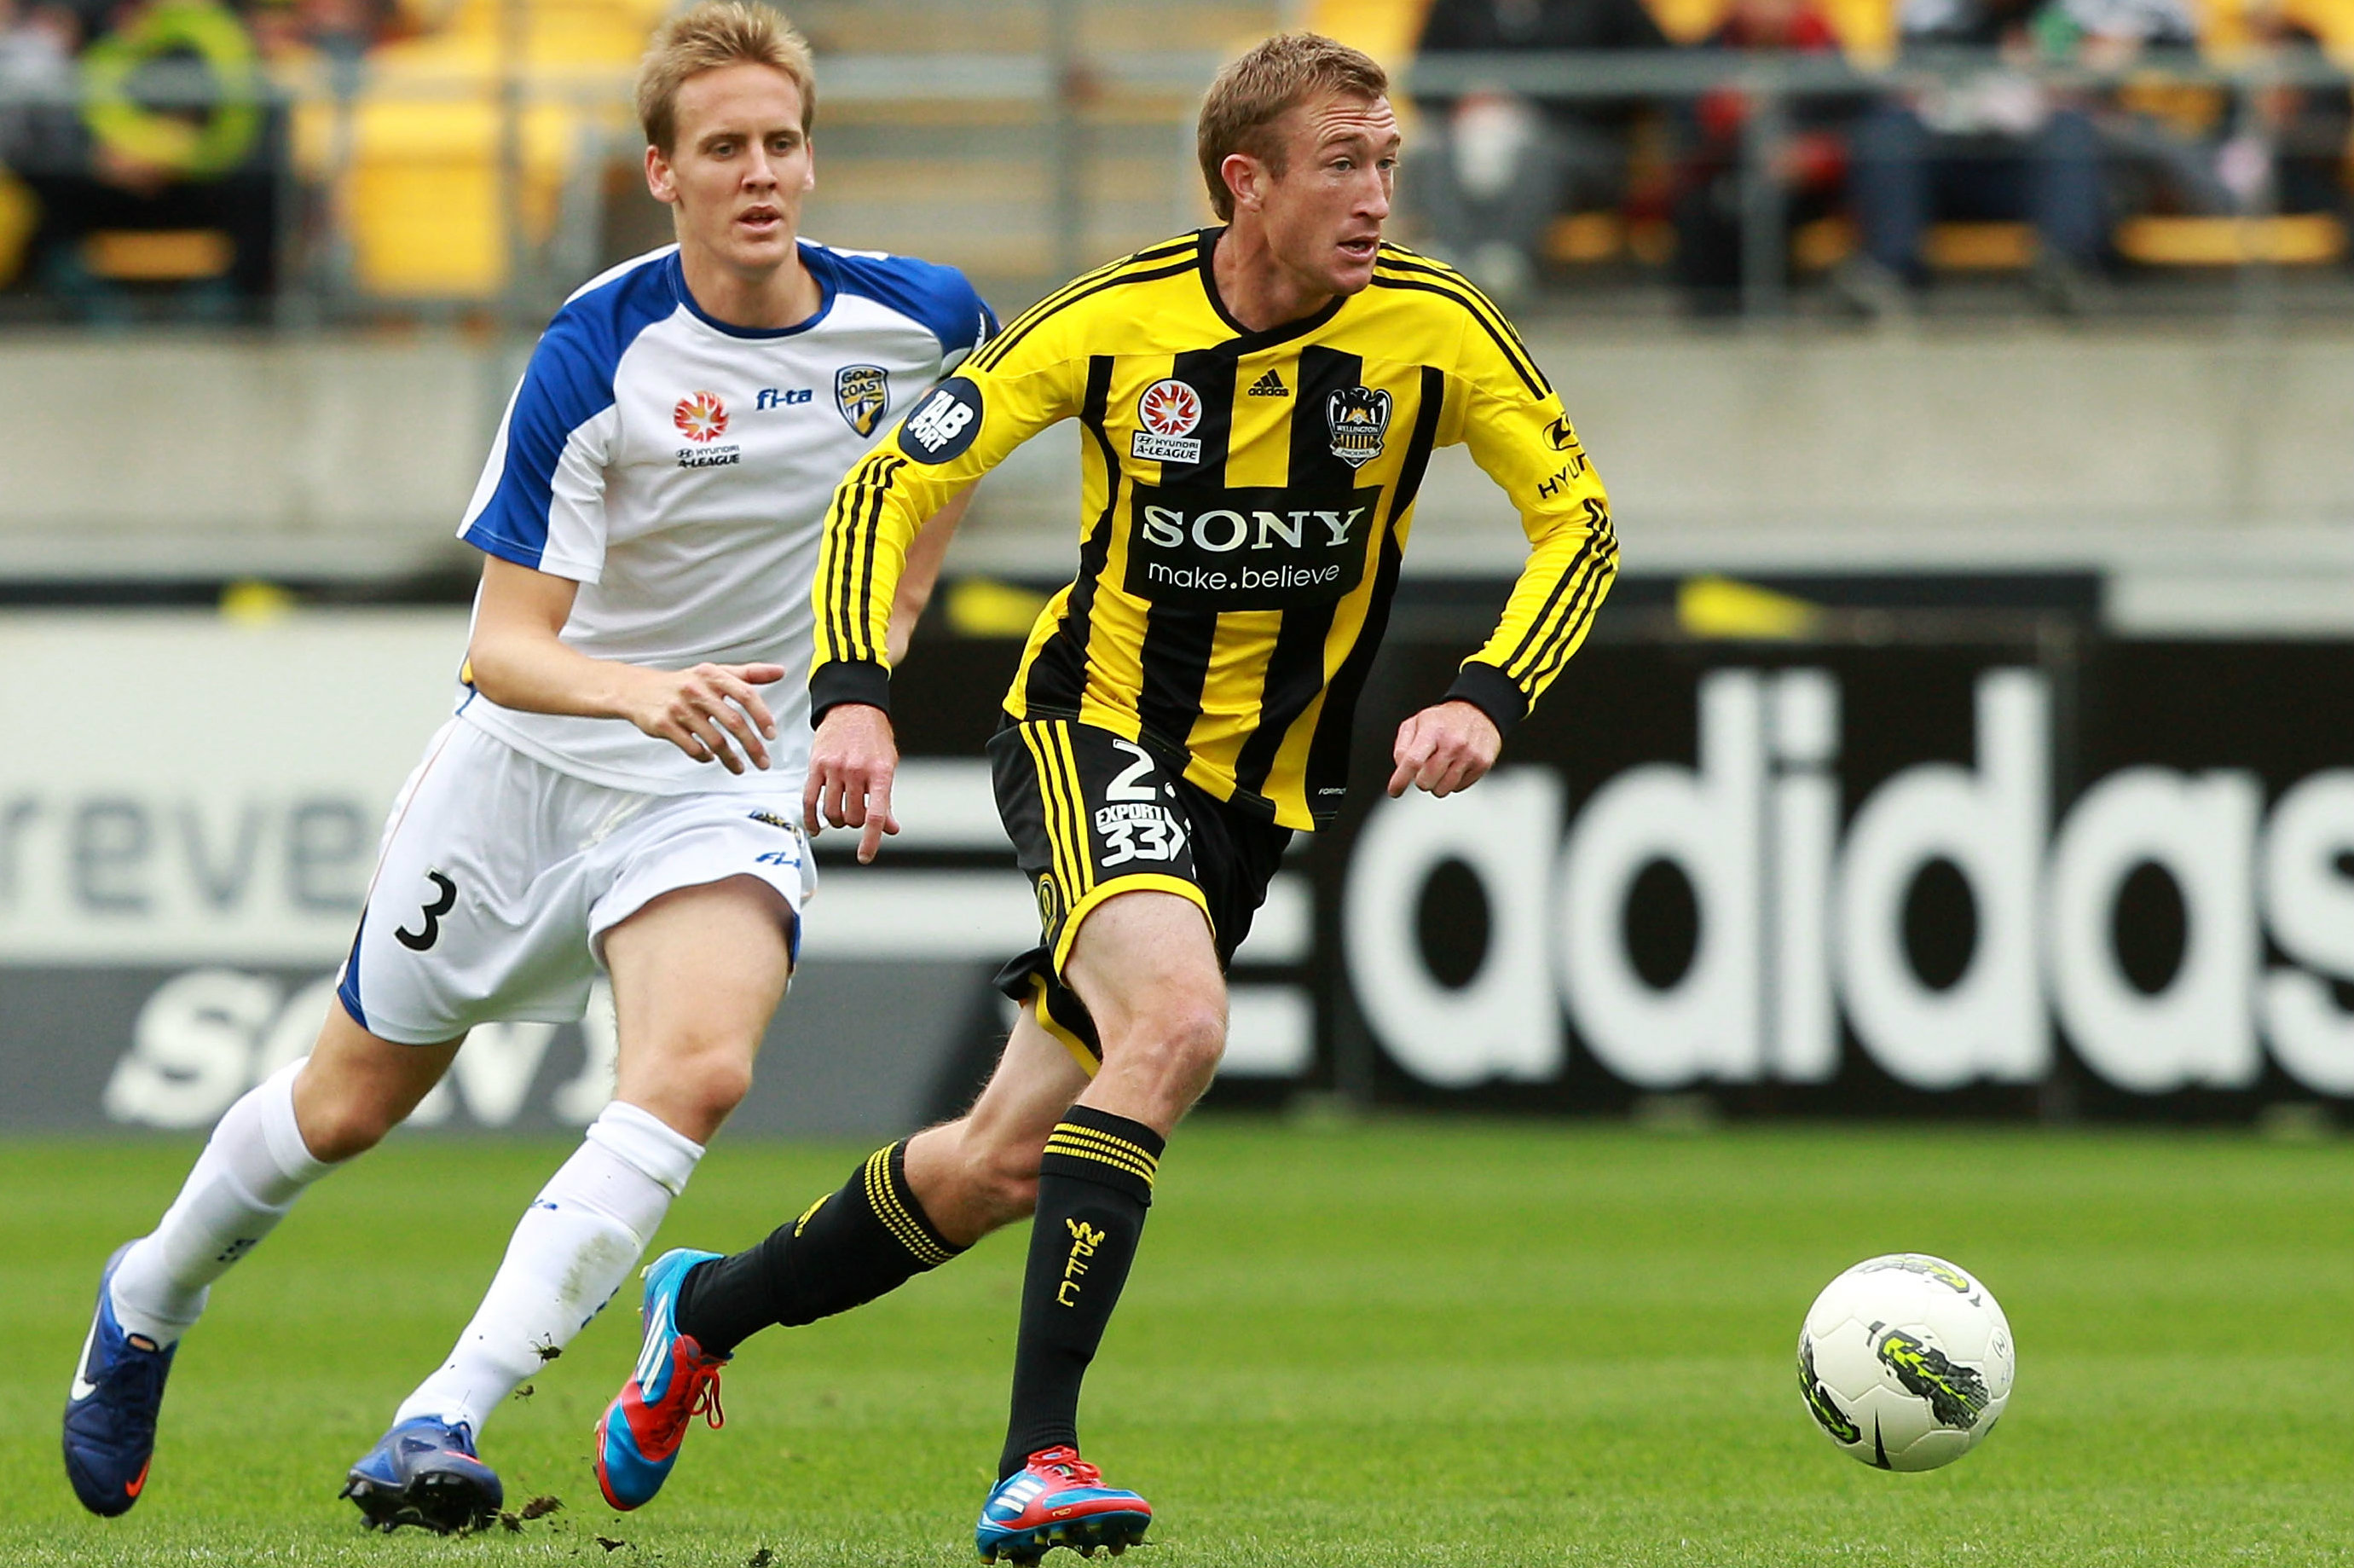 Before finding a home with Olympic FC, Alex Smith played for Wellington Phoenix and Gold Coast United